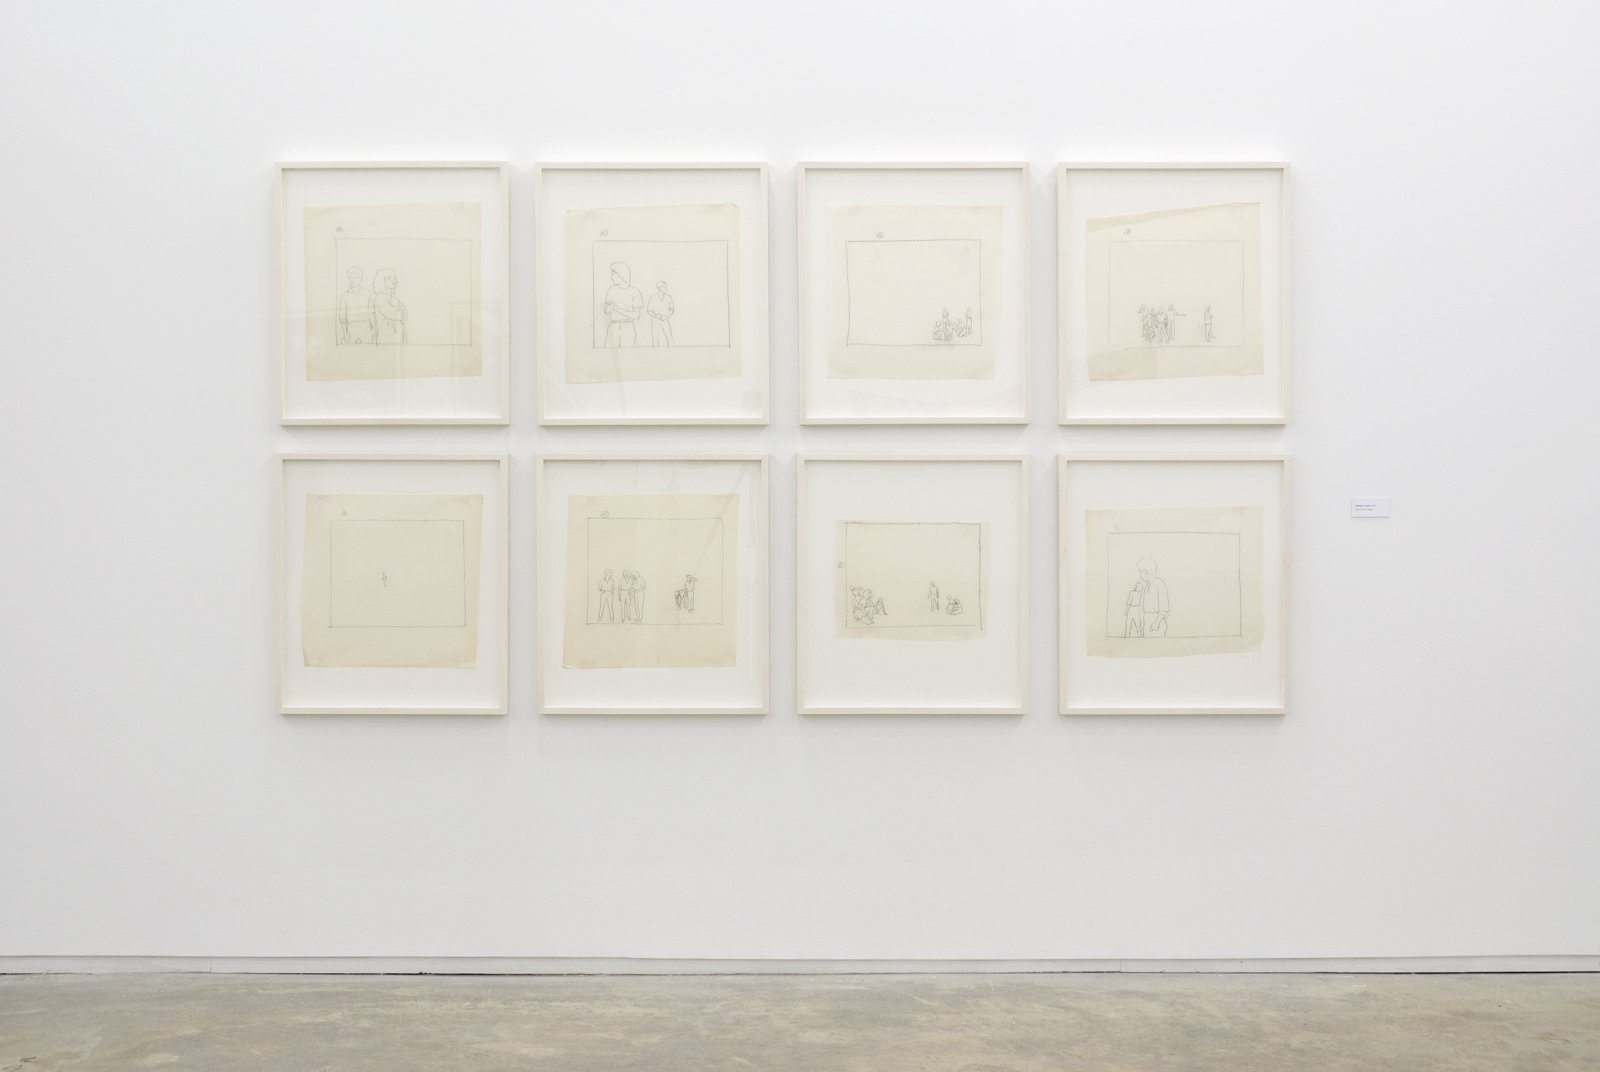 Ian Wallace, Tracings for Lookout, 1979, 8 pencil tracings on vellum, 27 x 24 in. (69 x 61 cm)